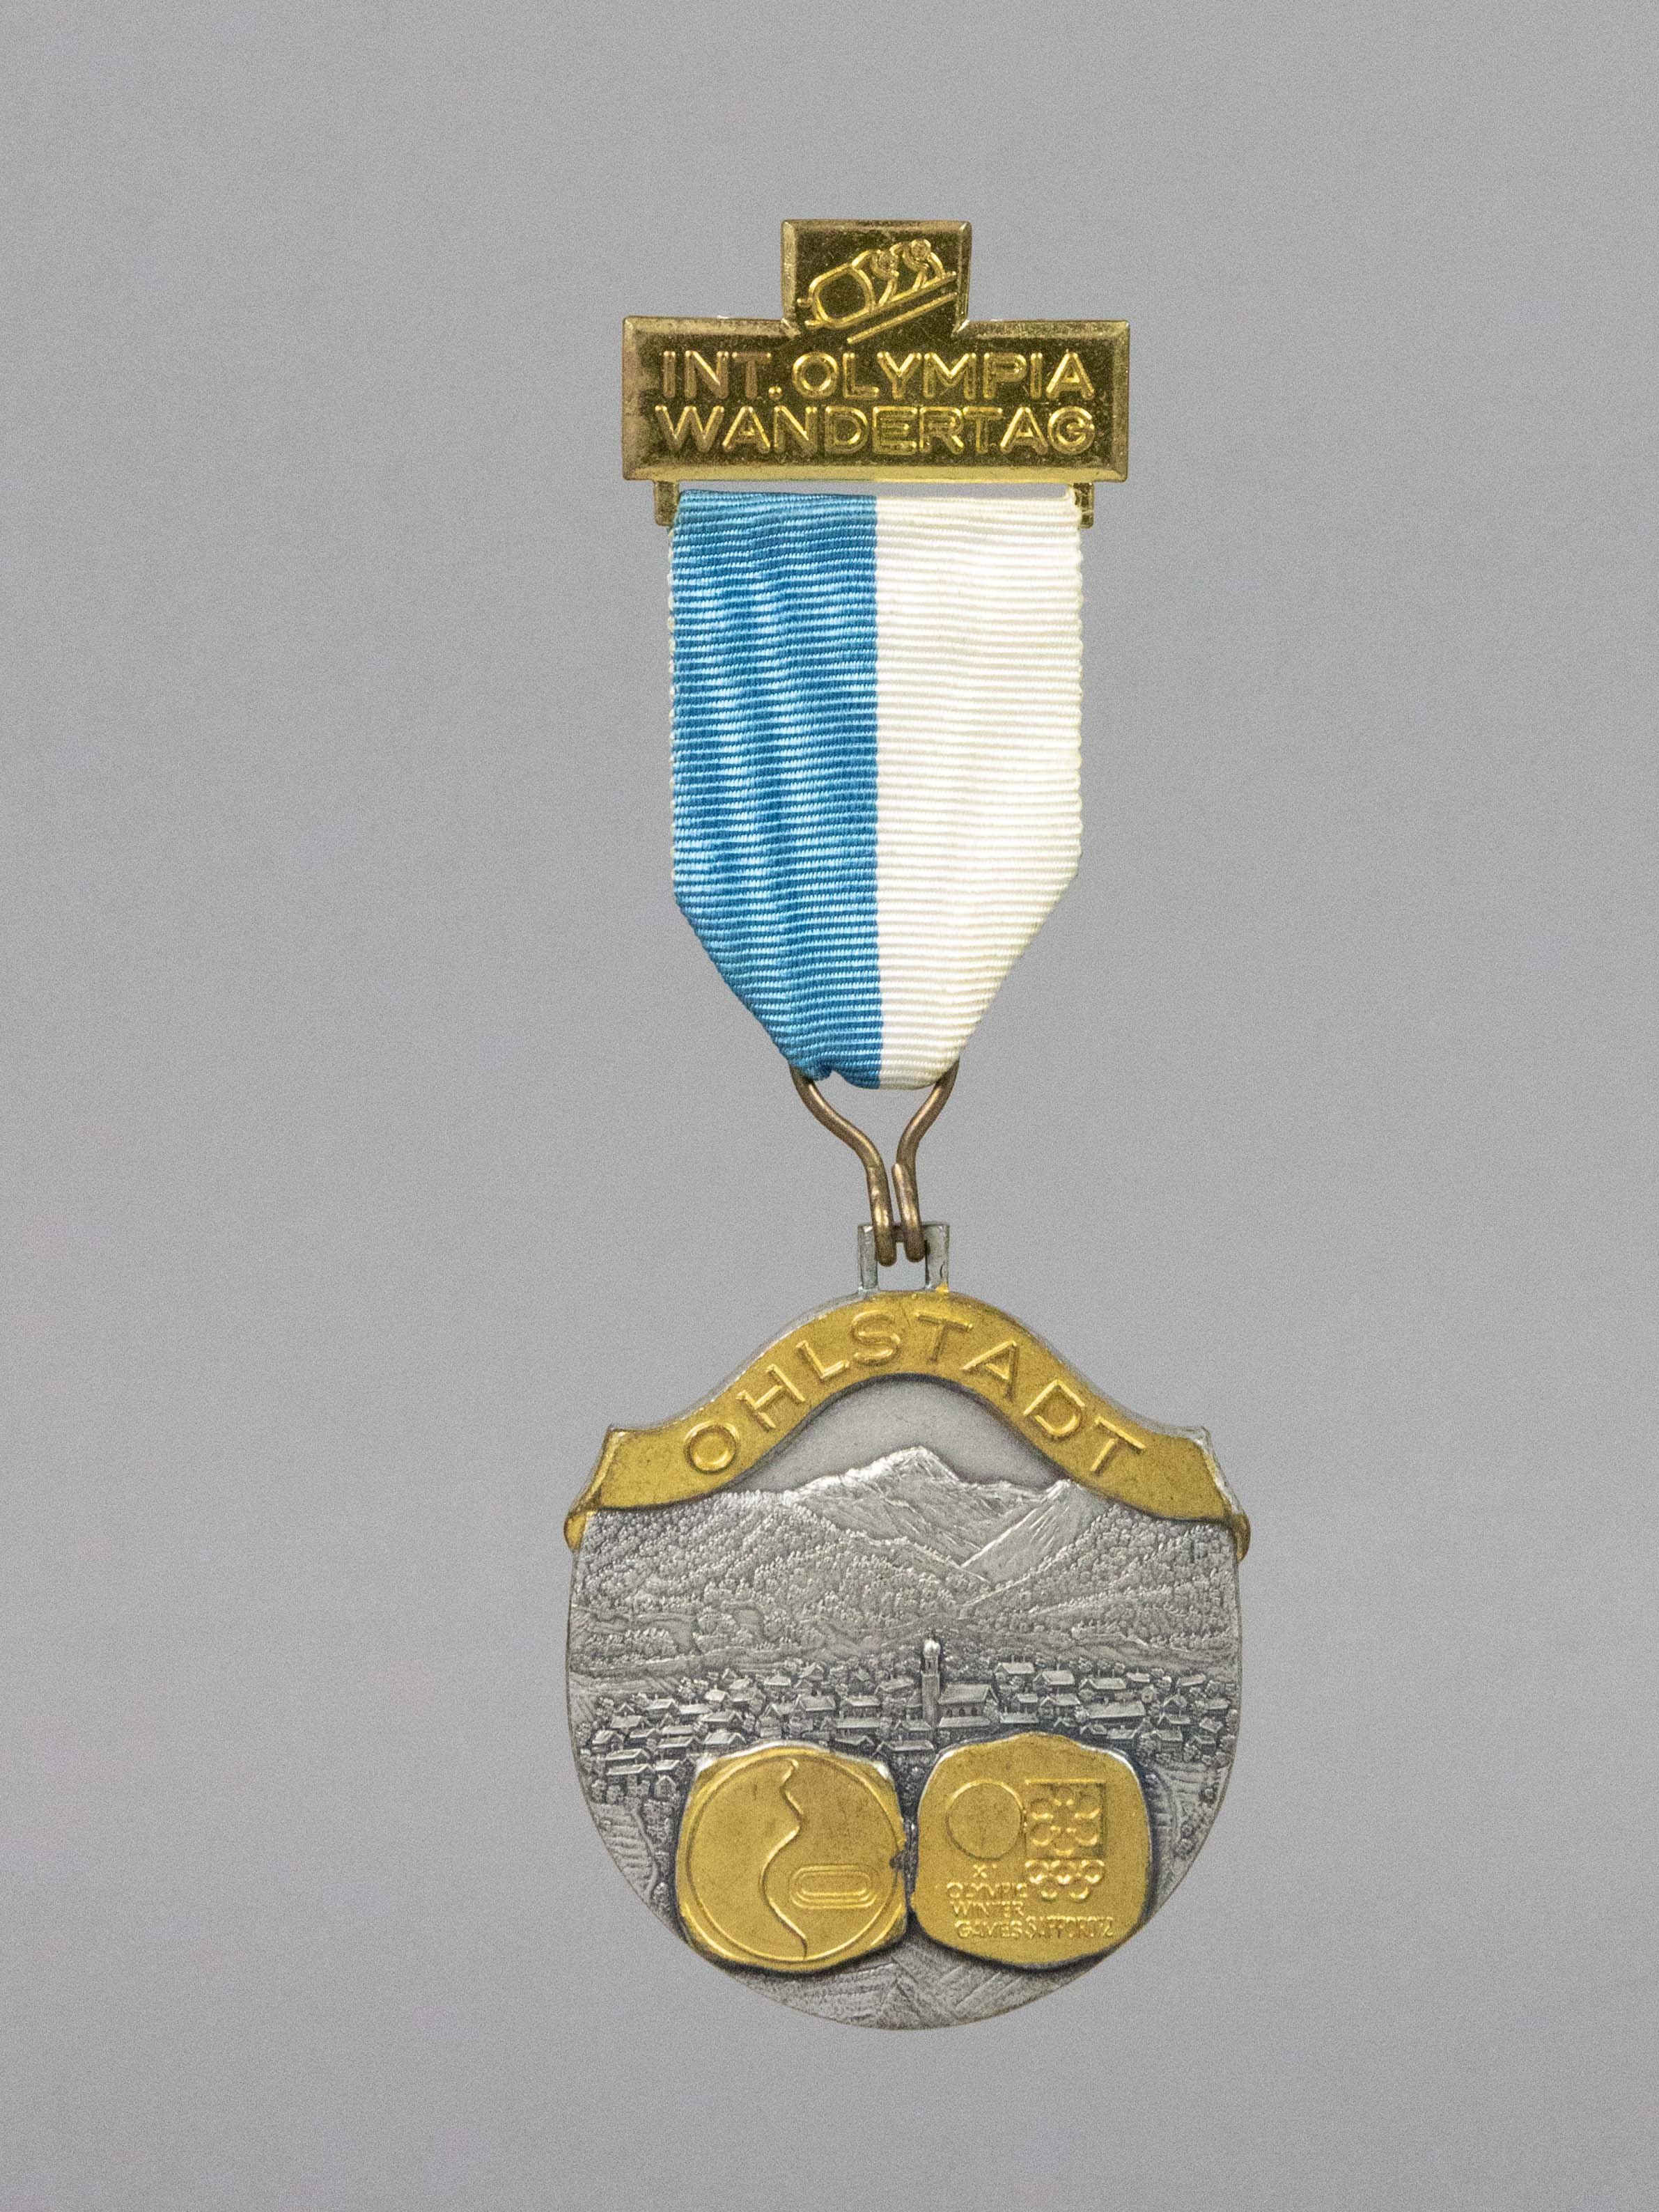 Medaille des int. Olympia Wandertag in Ohlstadt (Sportmuseum Berlin CC0)